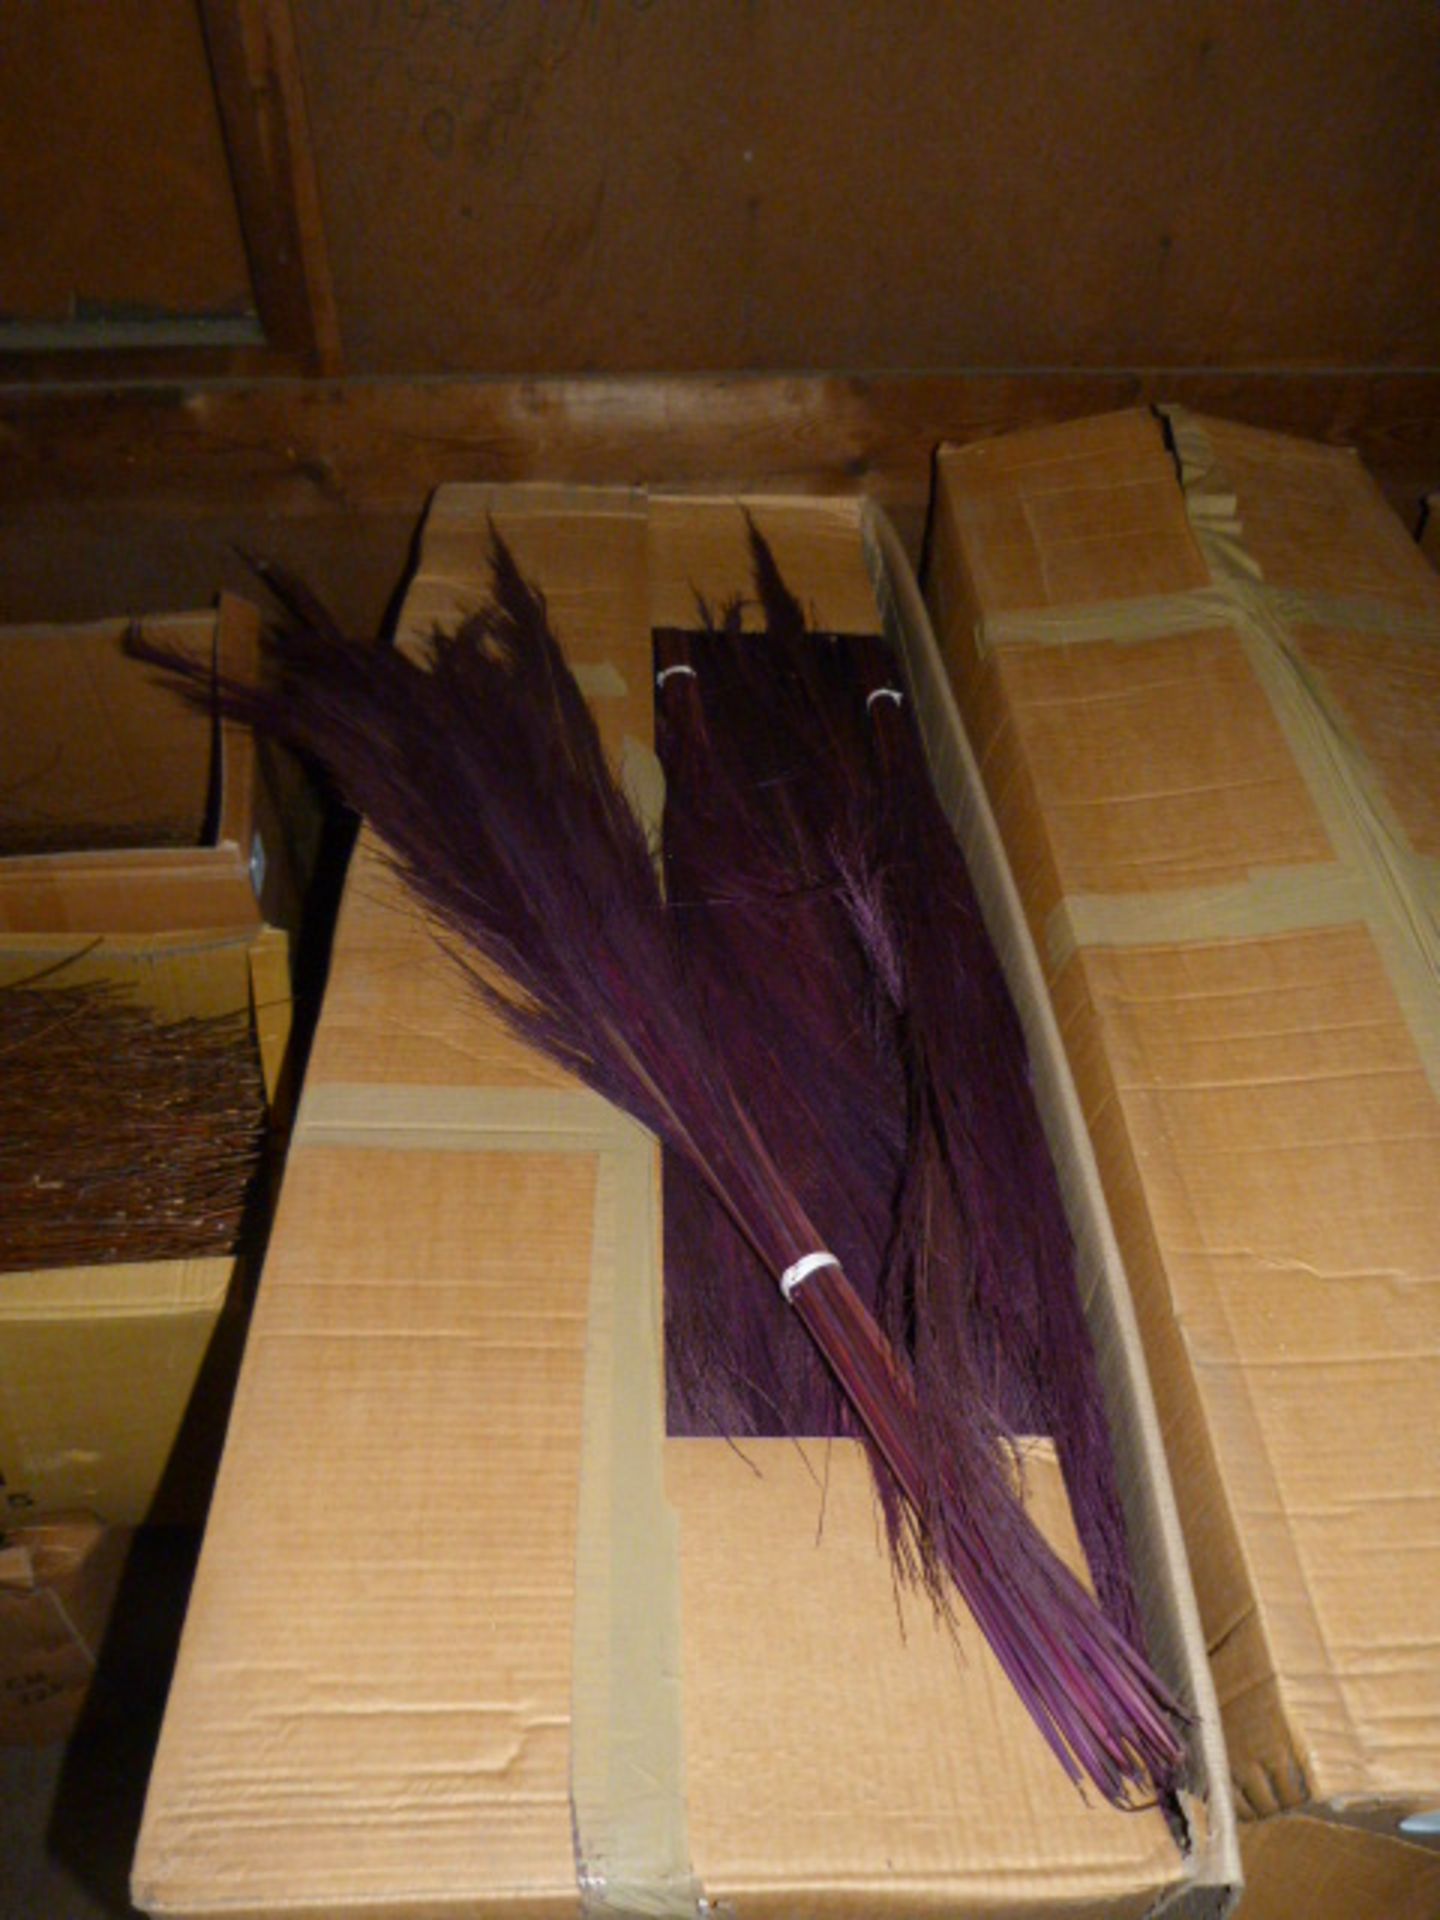 *Box Containing 80 Bunches of Purple Broom Grass